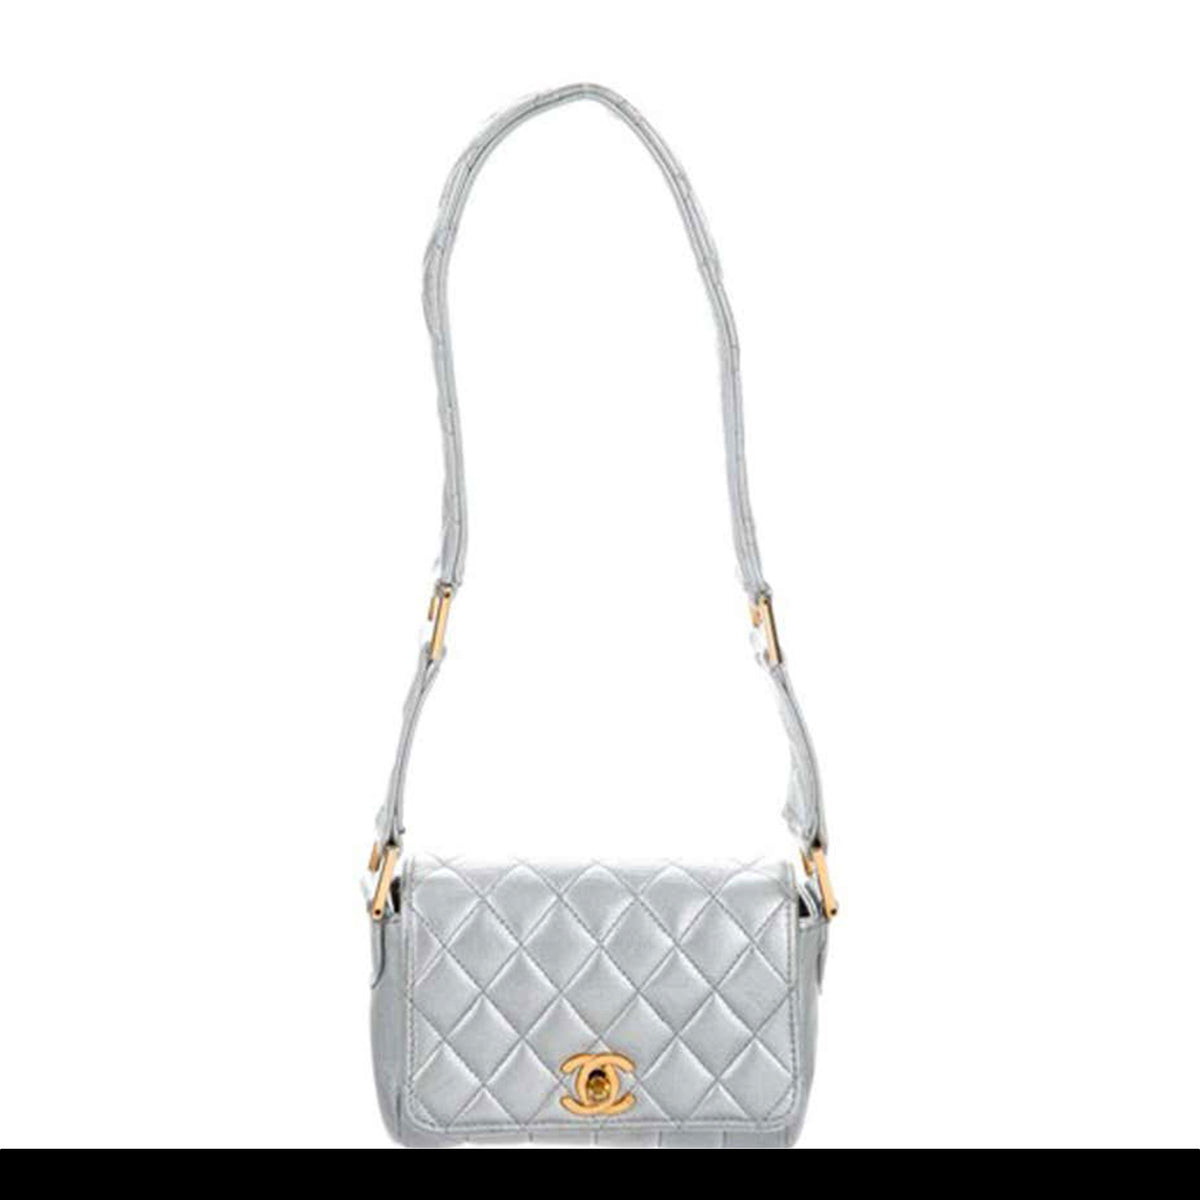 Chanel Clutches & Evening Bags for Sale at Auction